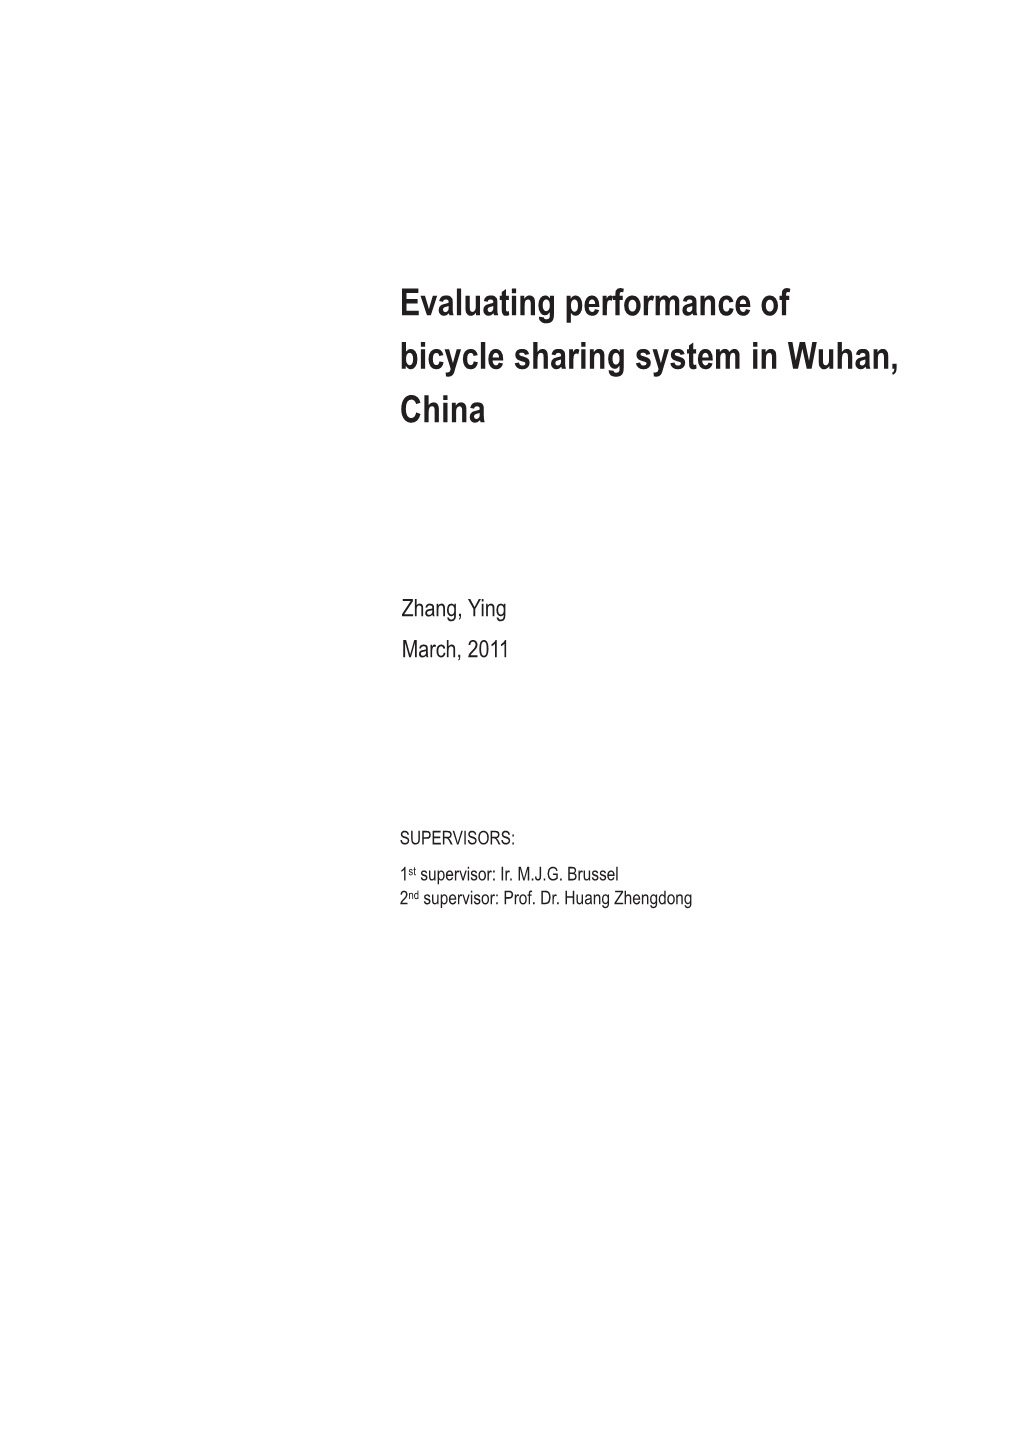 Evaluating Performance of Bicycle Sharing System in Wuhan, China